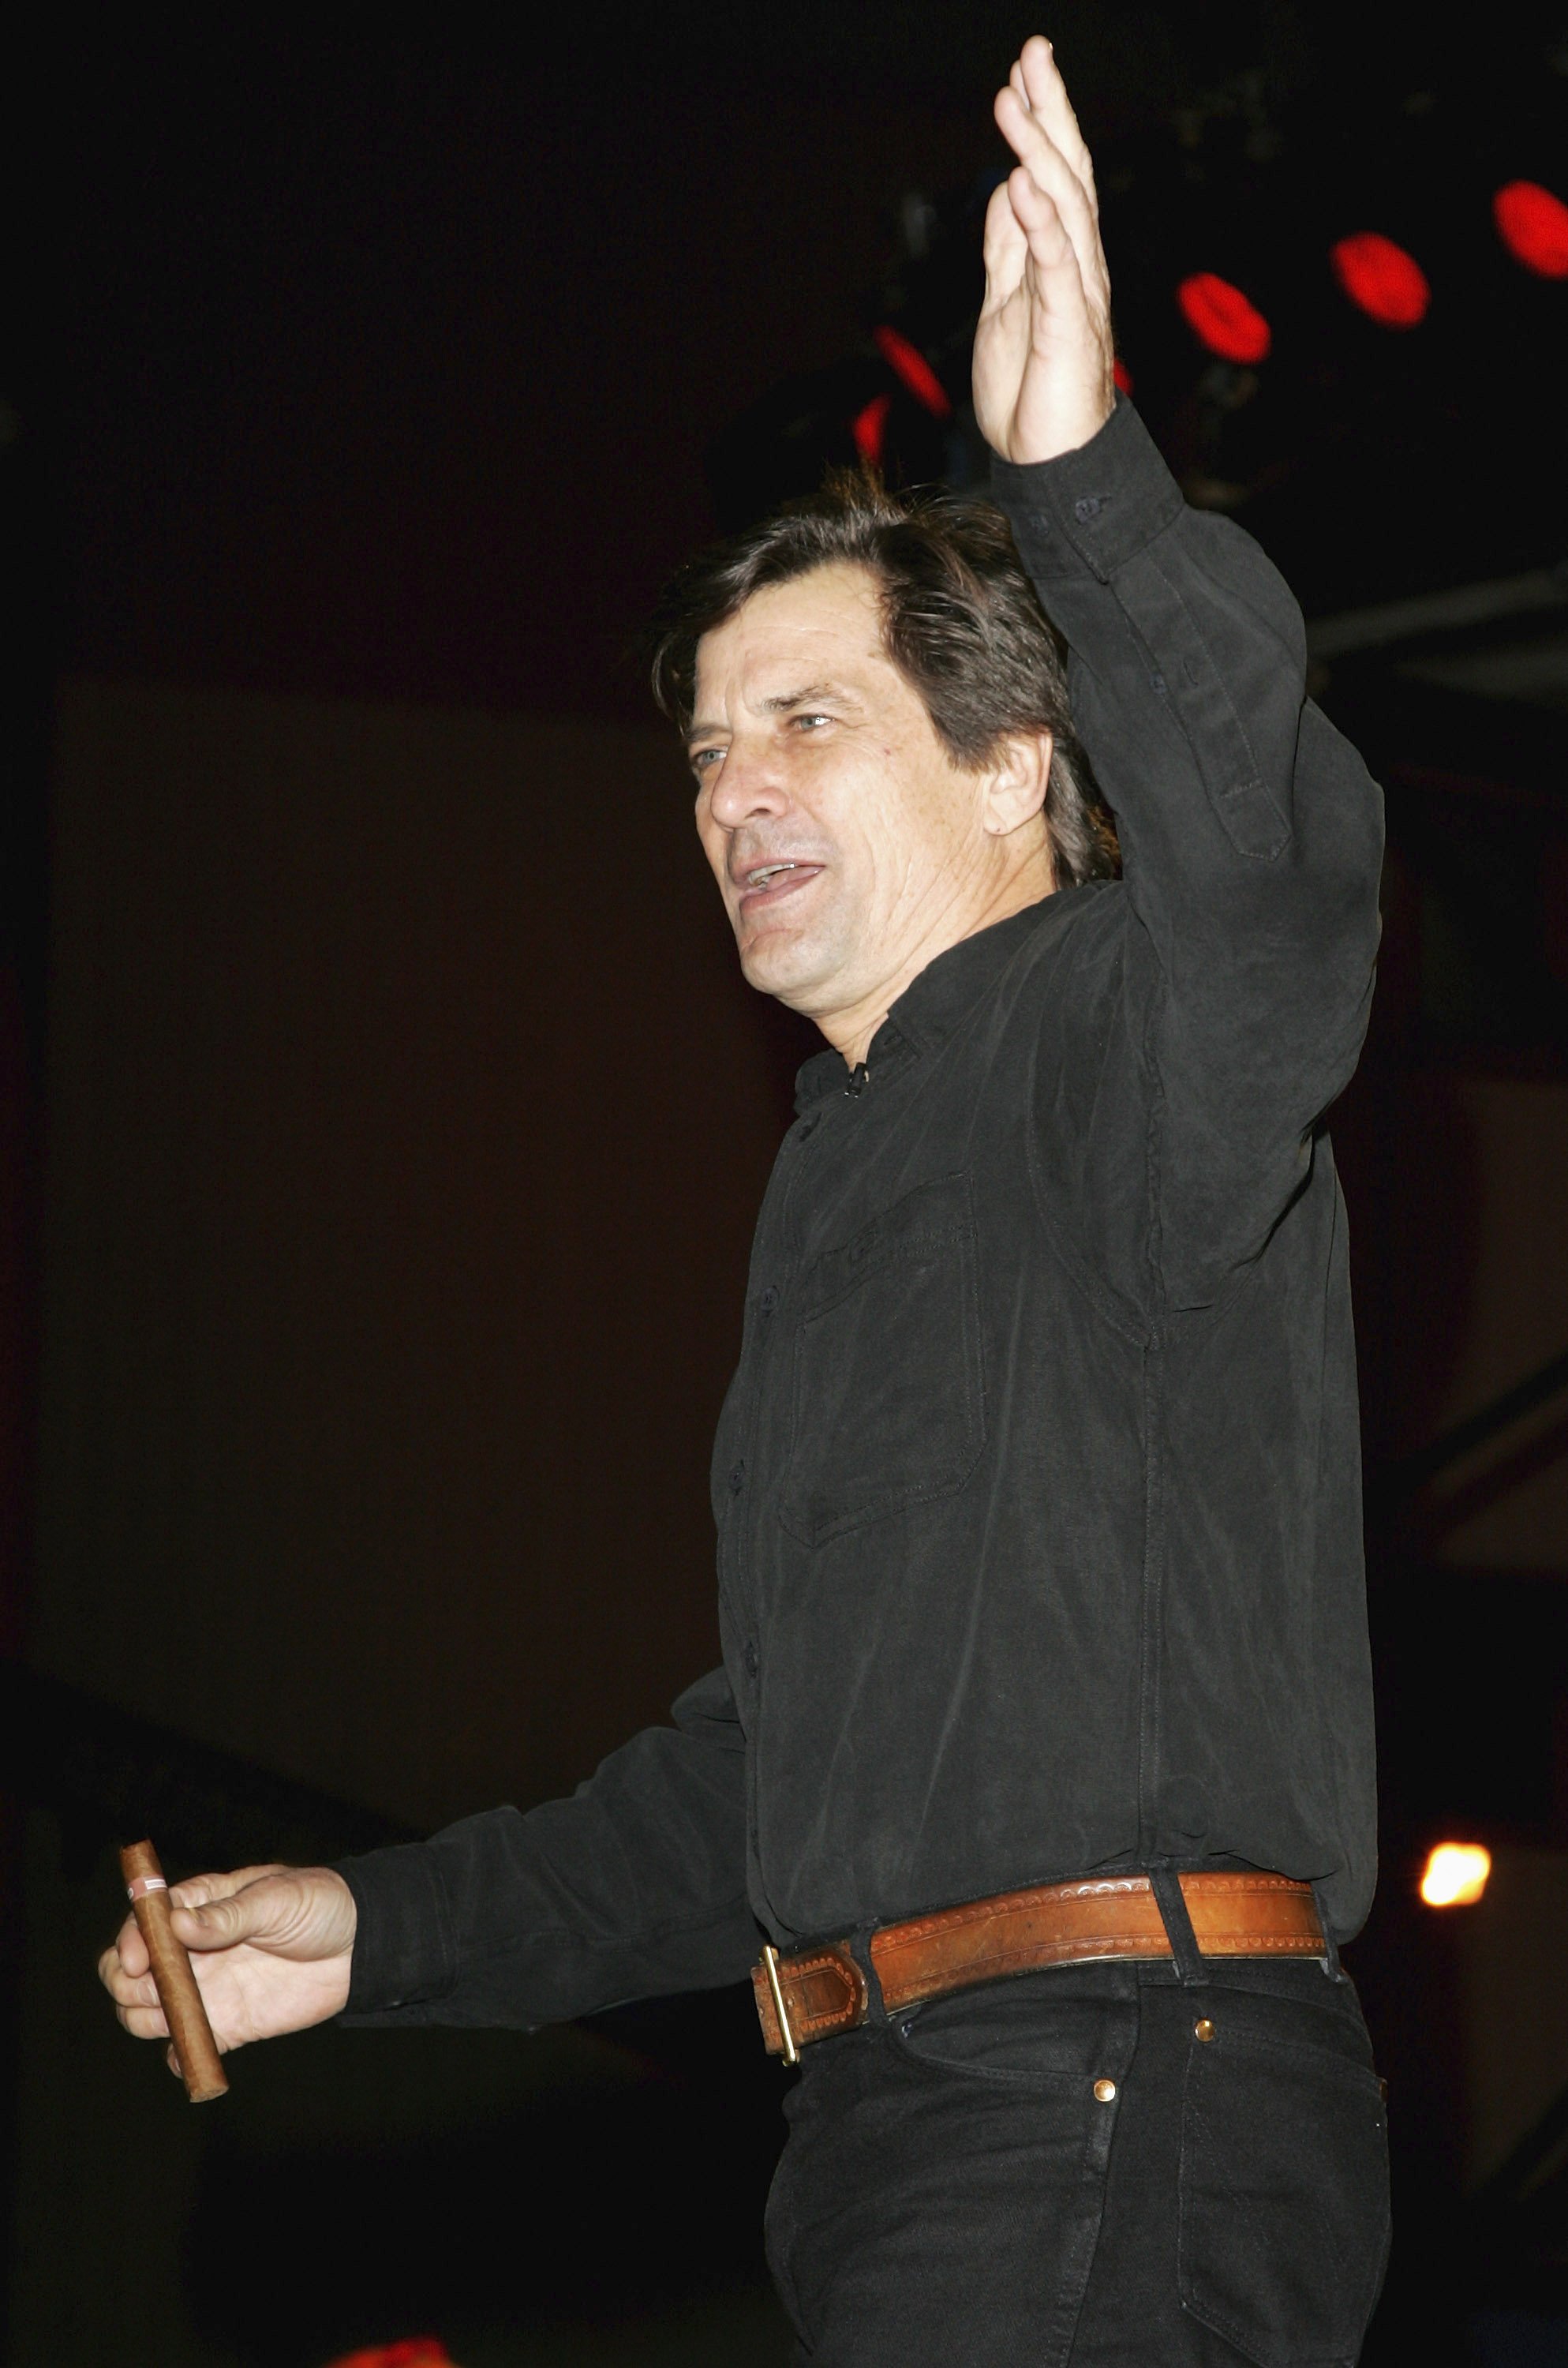 Dirk Benedict leaves the Celebrity Big Brother House, having been evicted during the grand final of series | Source: Getty Images